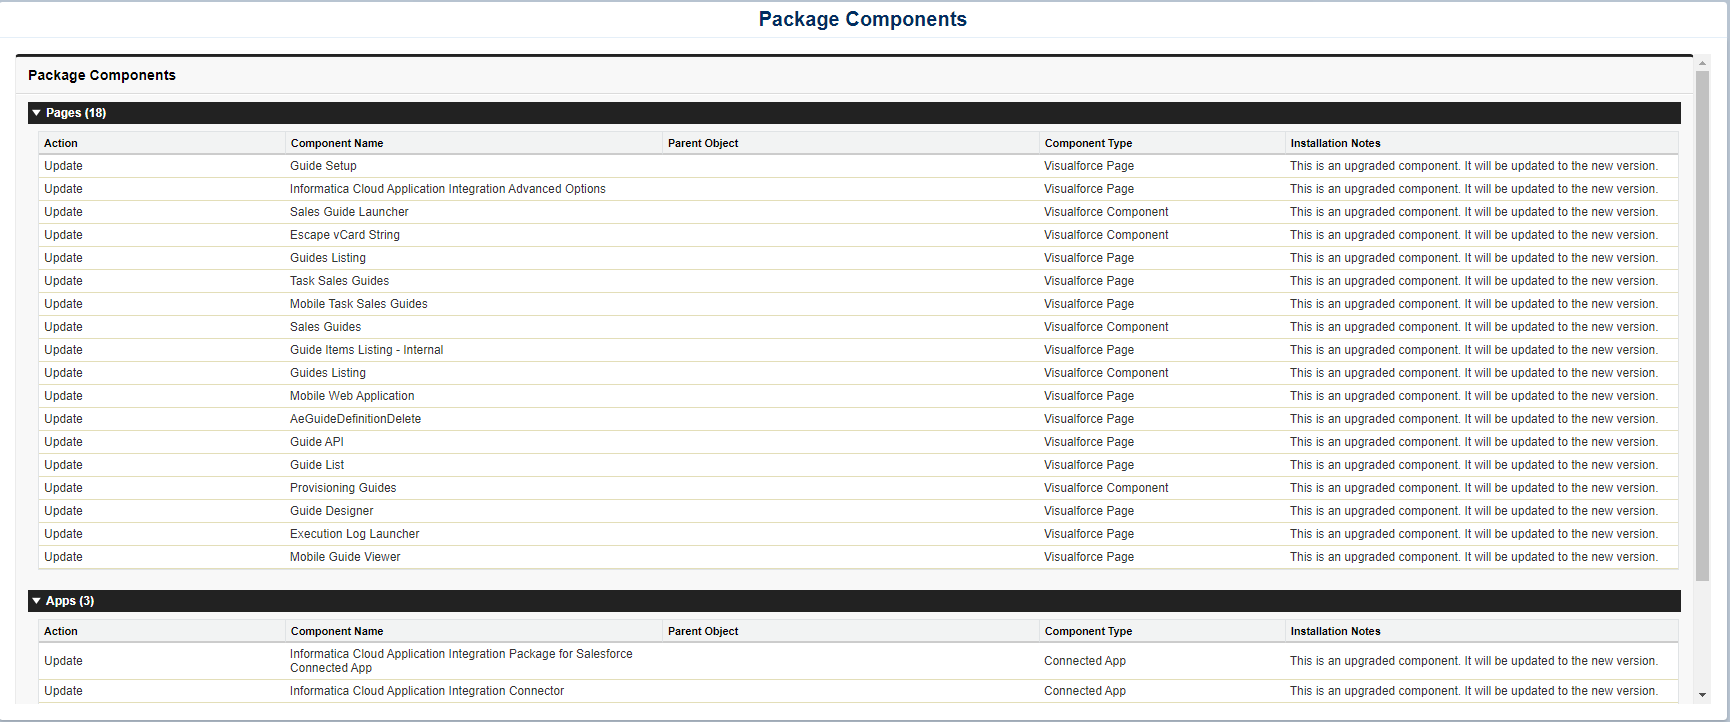 The image shows the detailed list of package components.